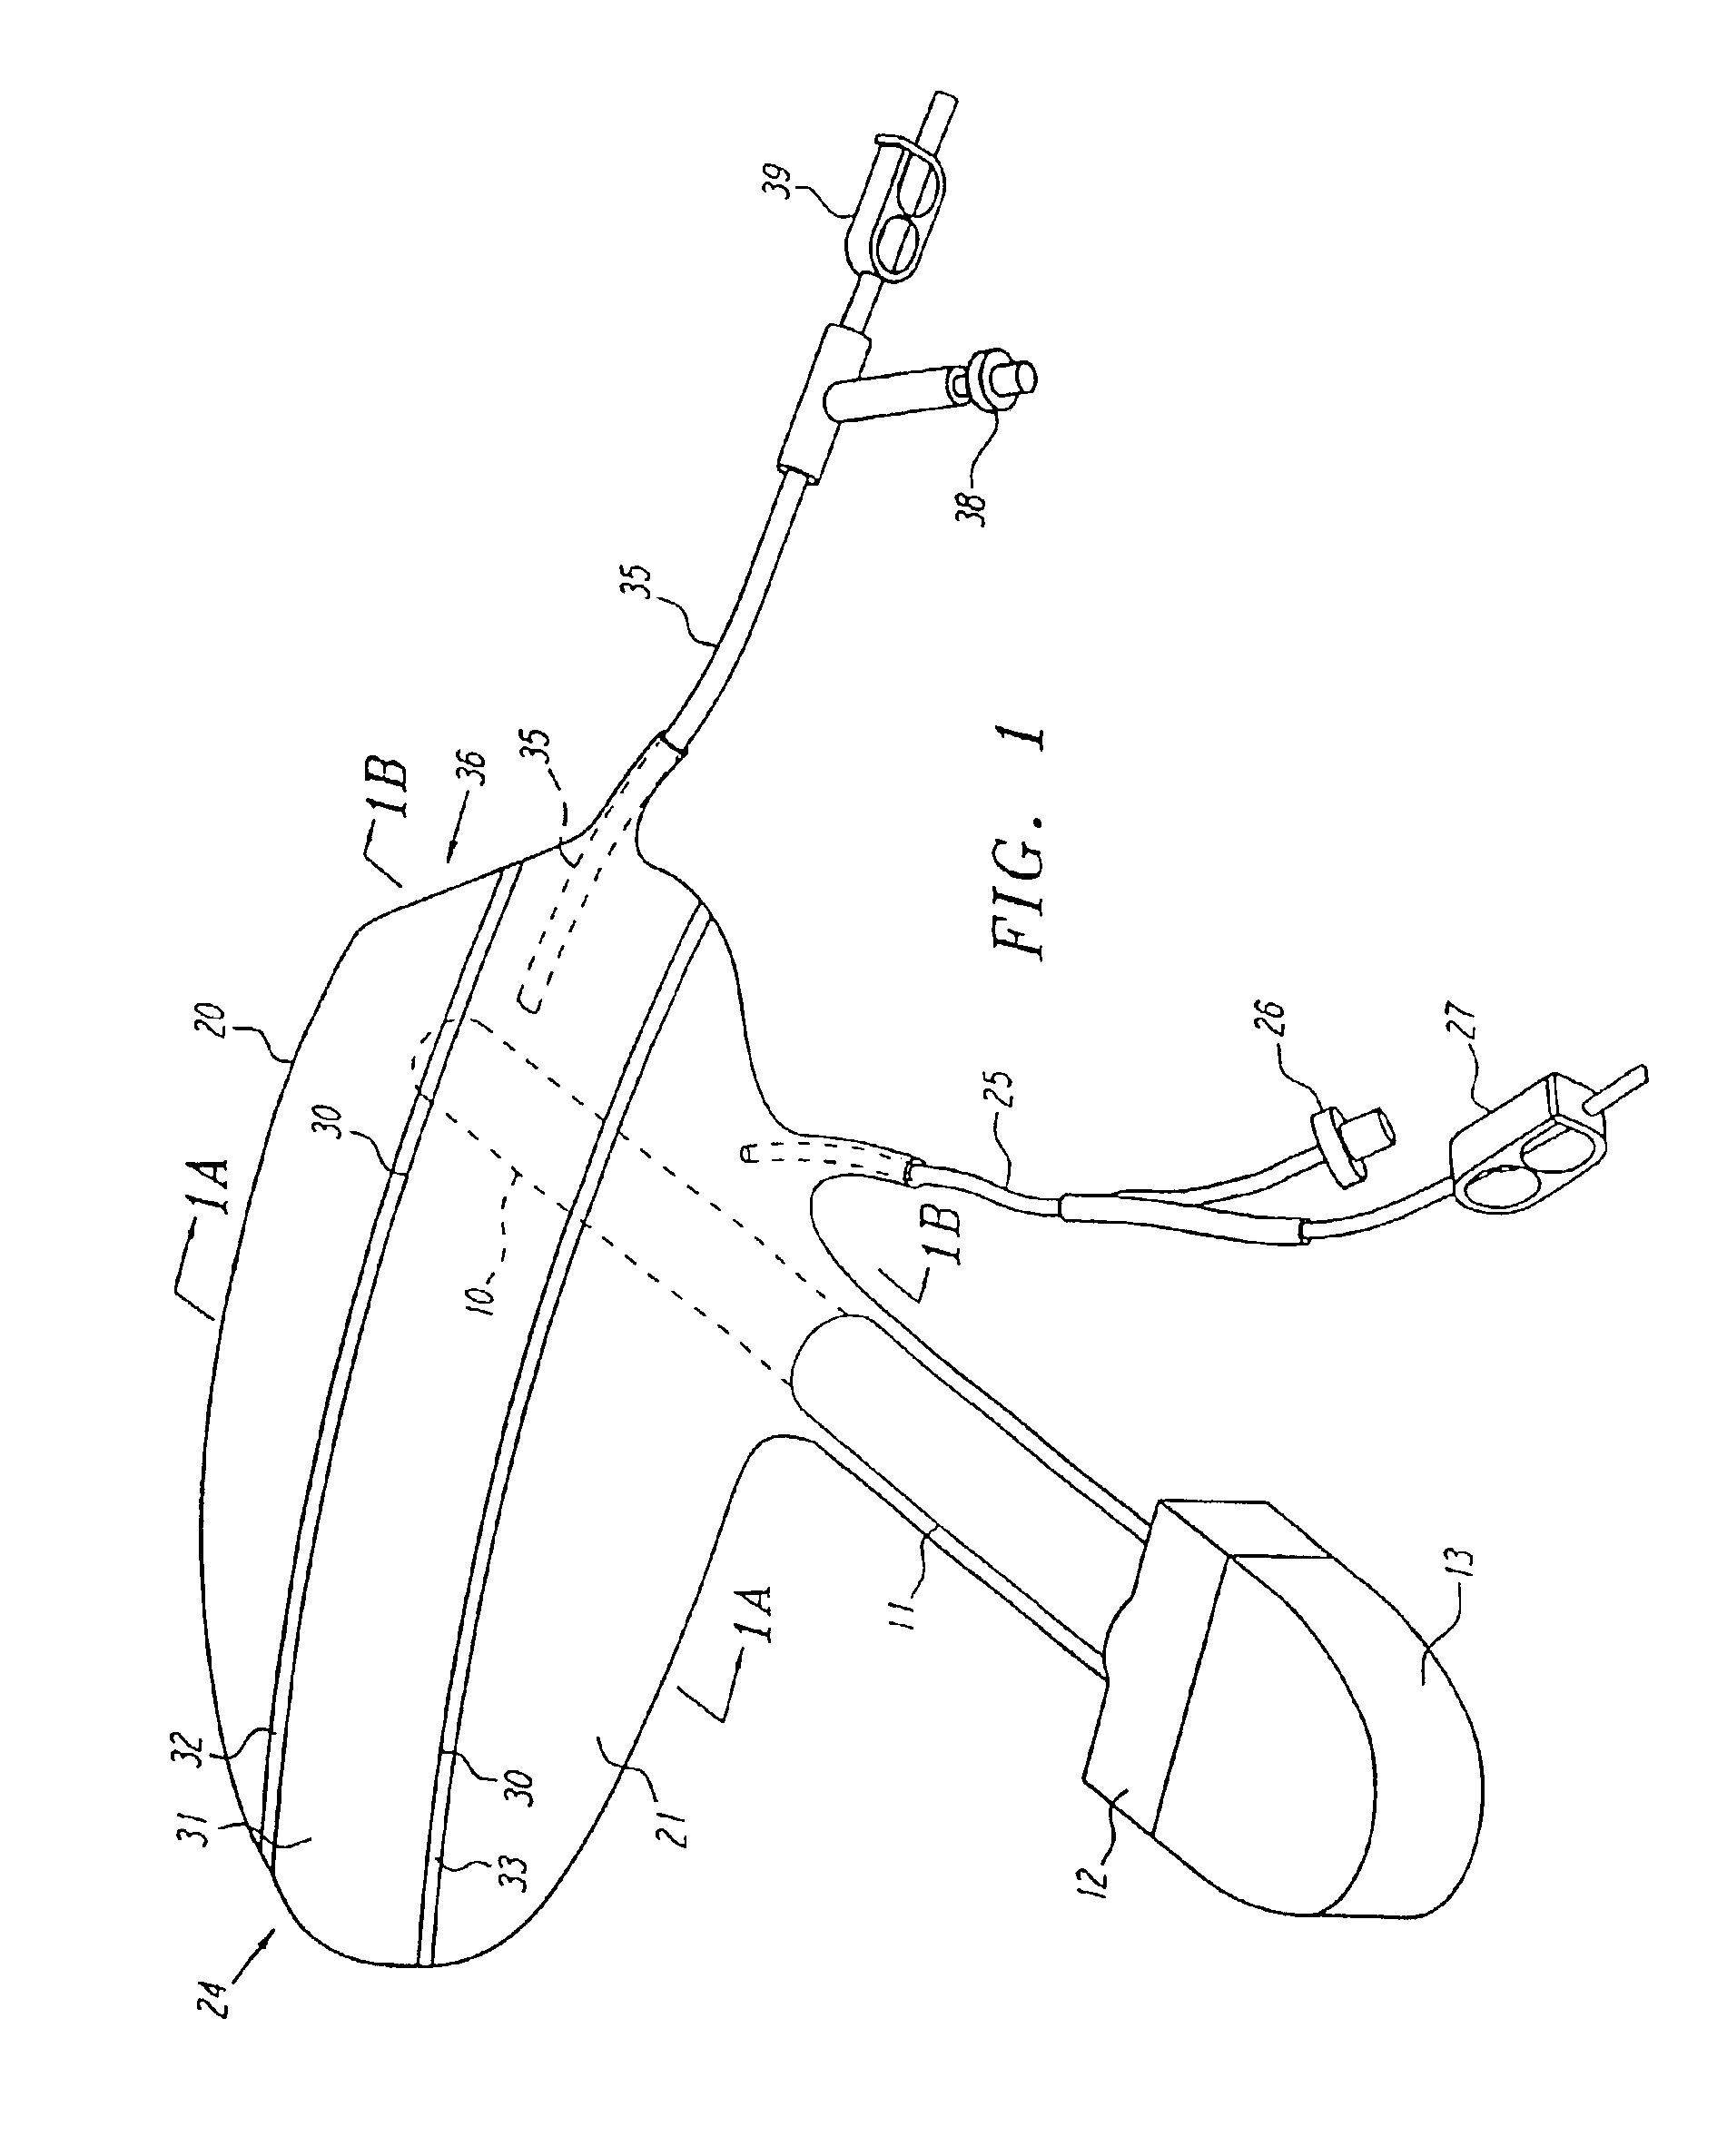 Method and apparatus for combined dissection and retraction